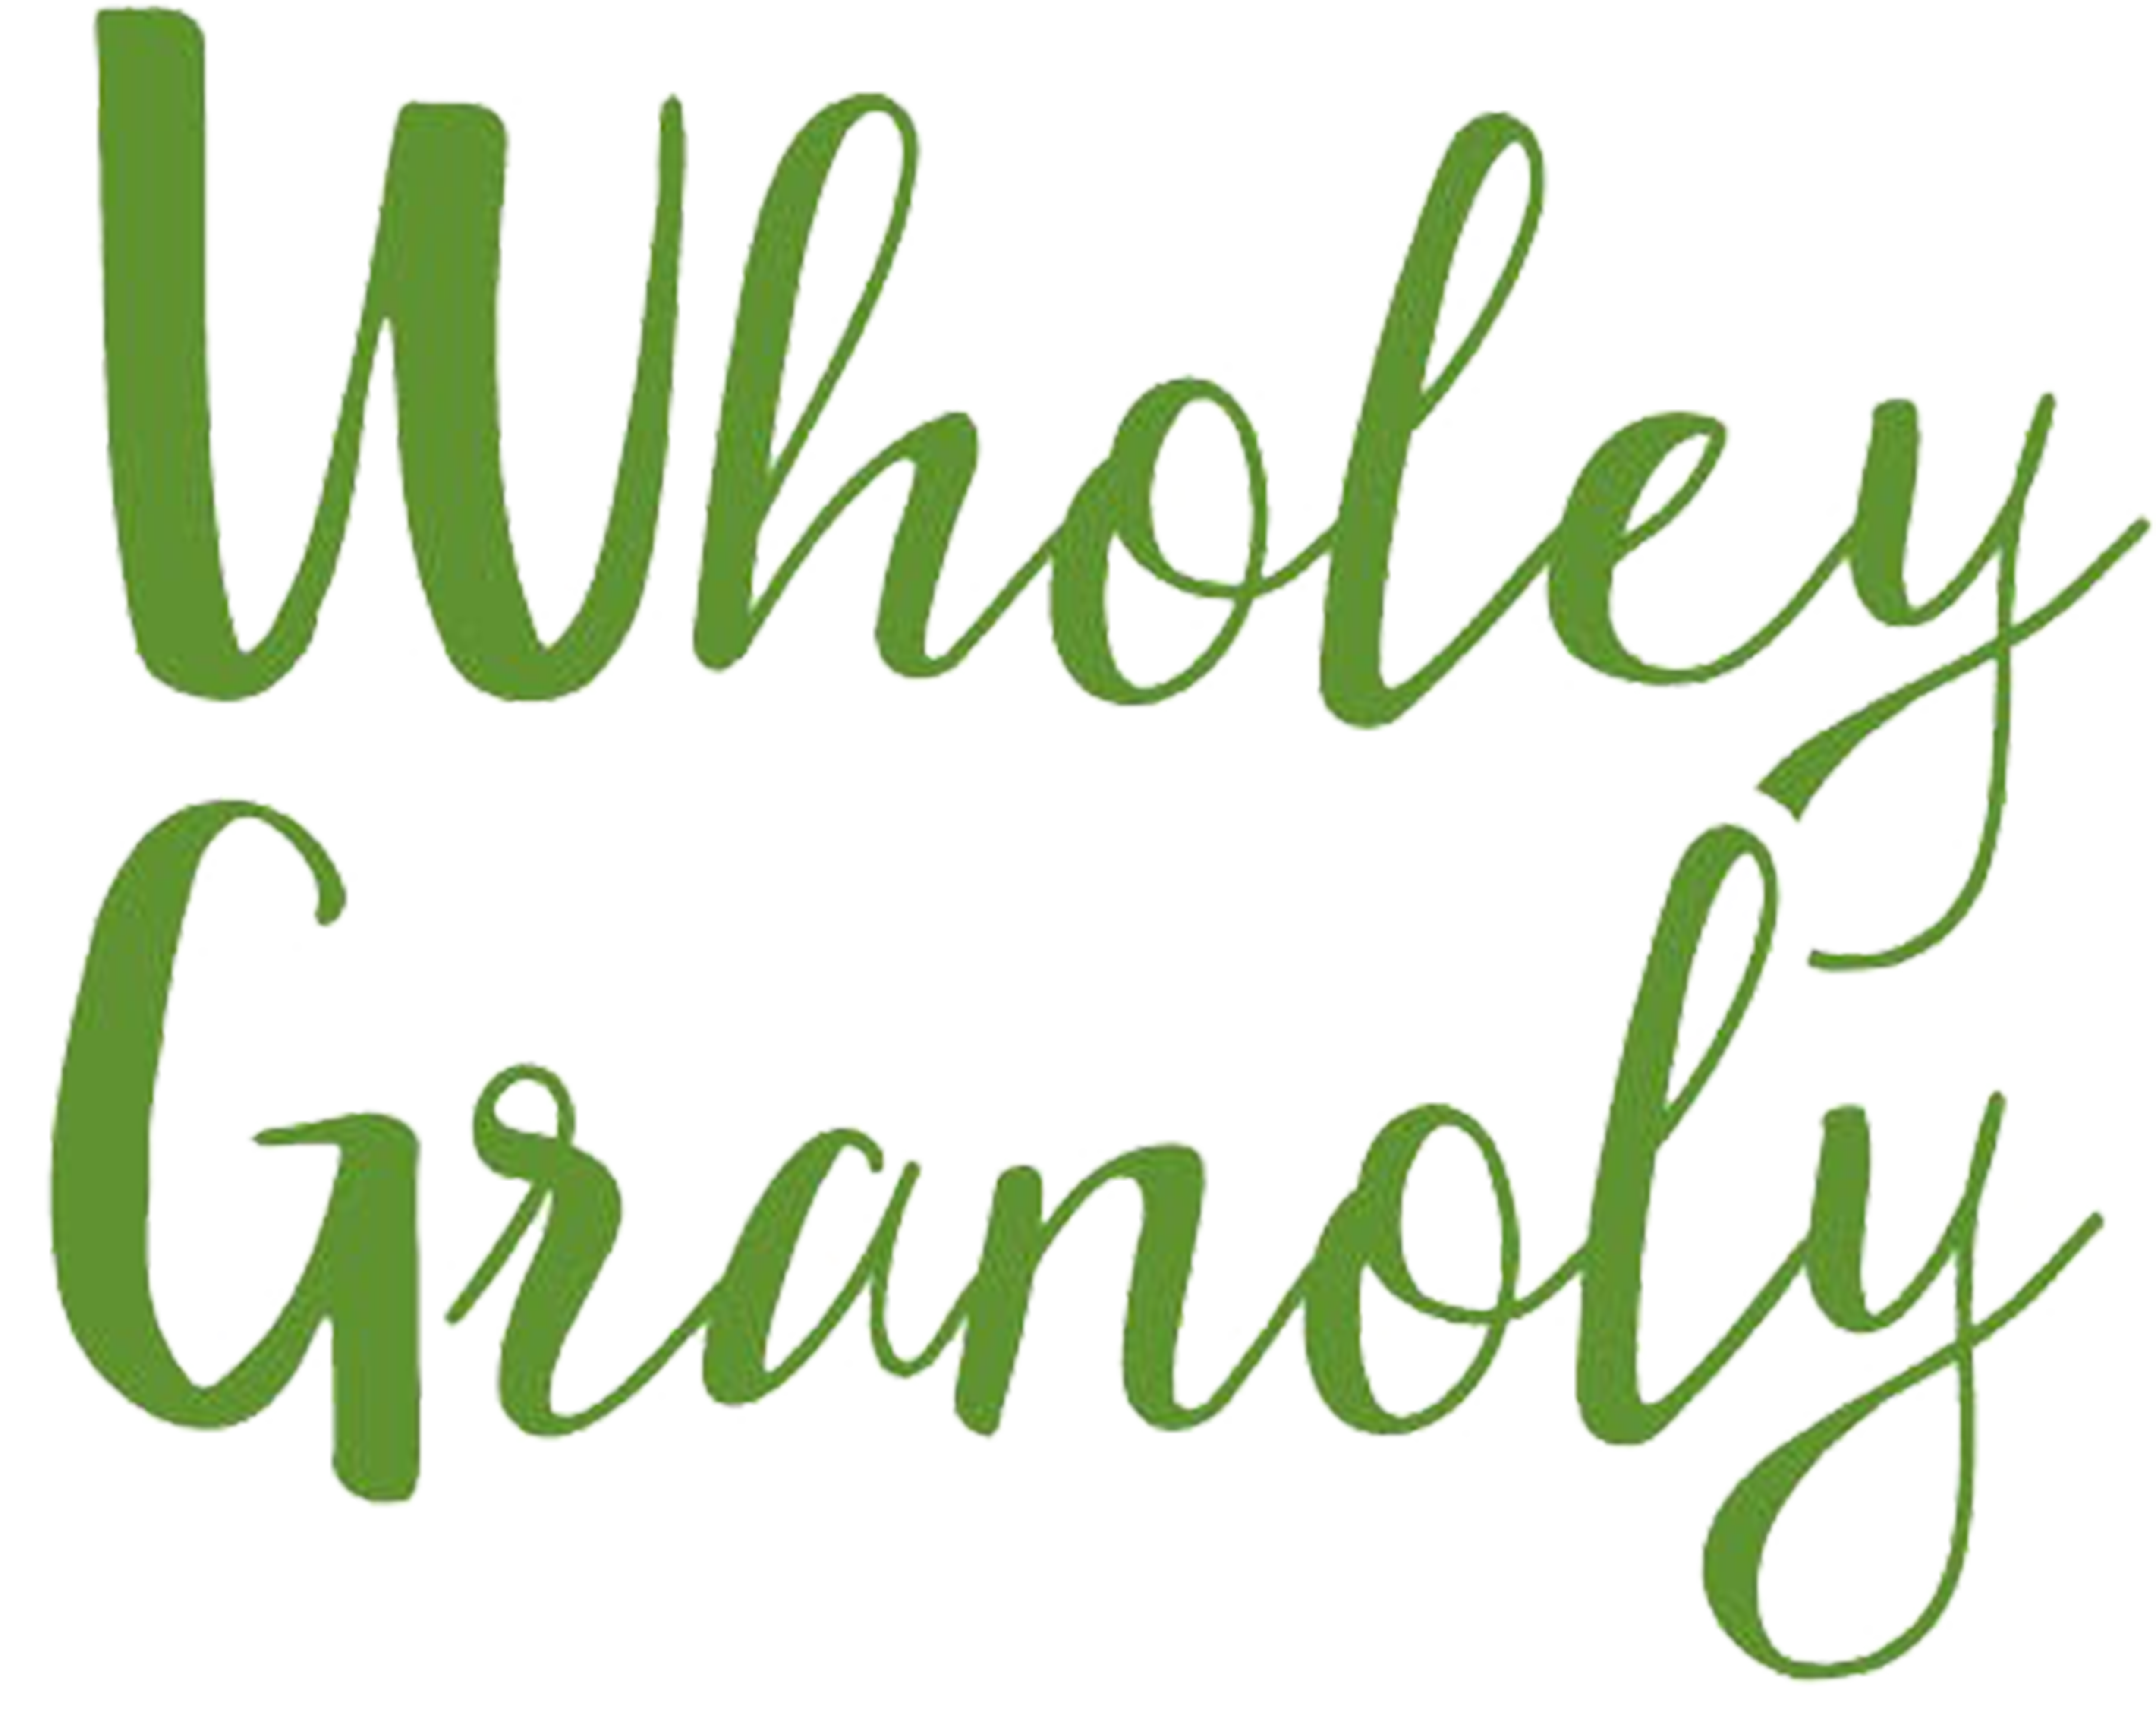 Wholey Granoly Home